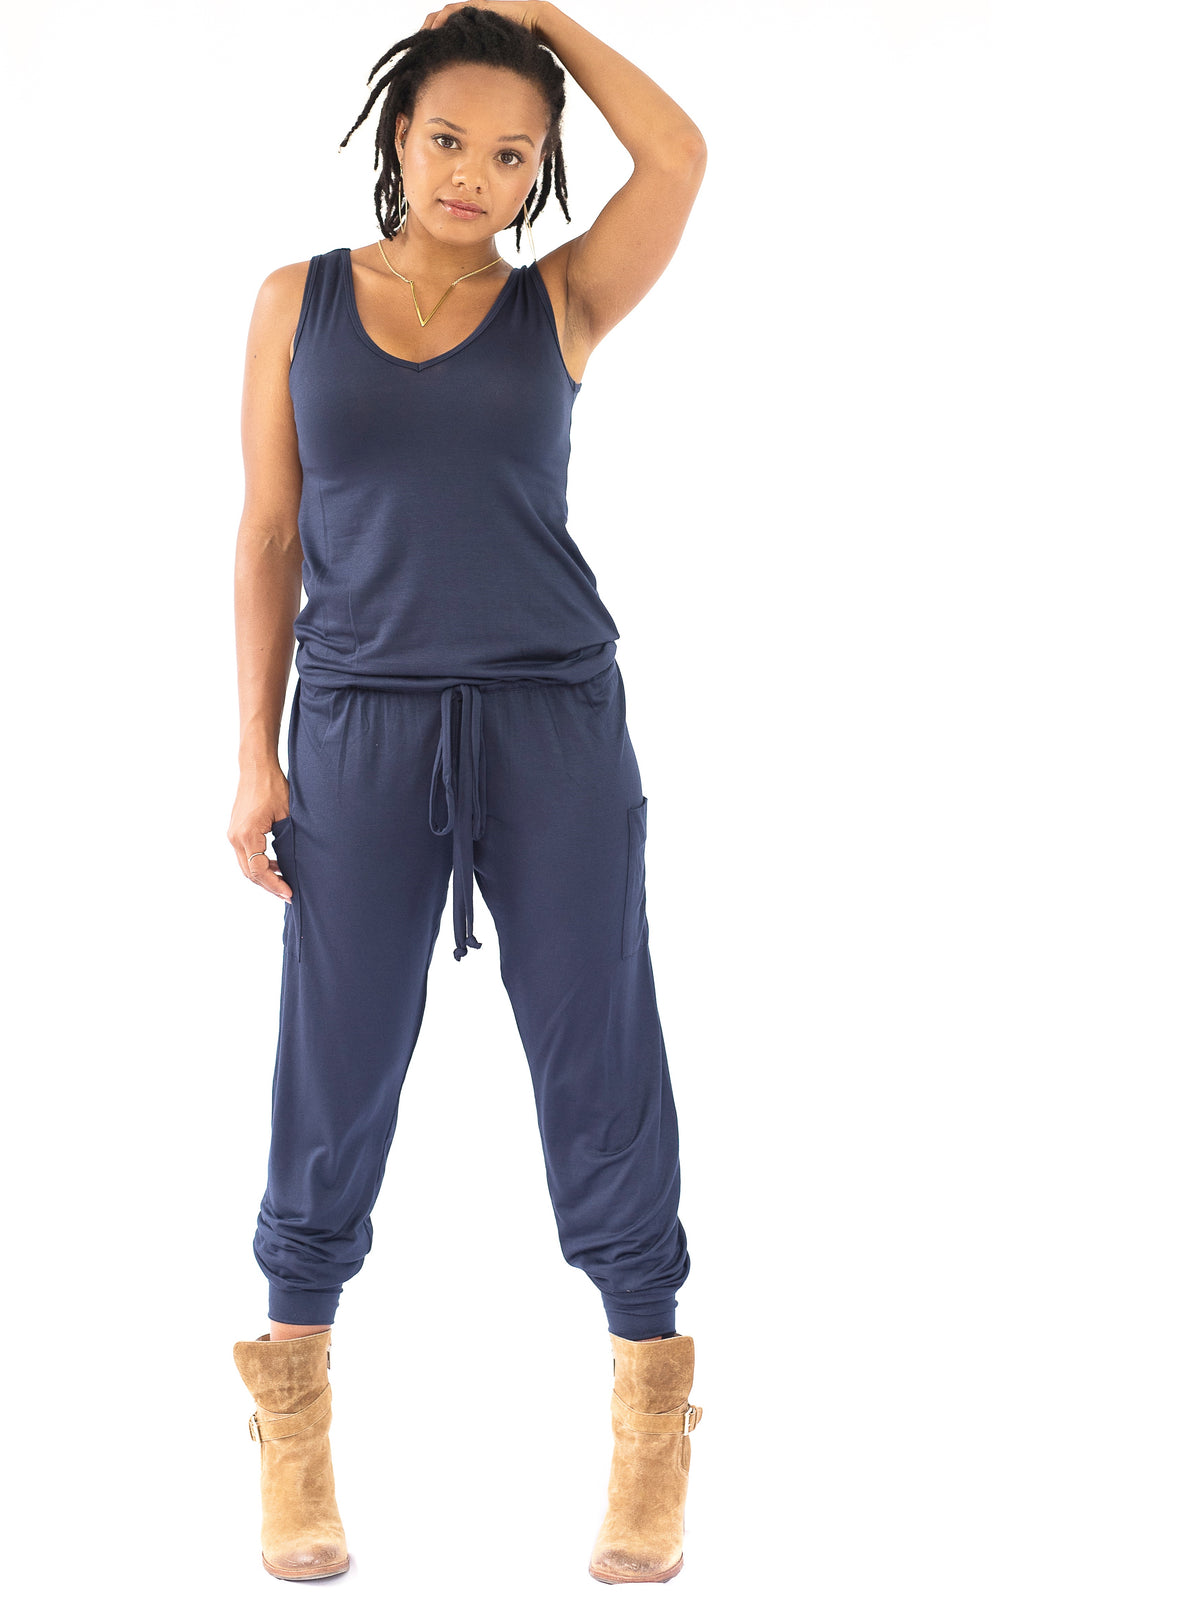 Hudson Jumpsuit by alex & harry in ink blue , maternity jumpsuit for pregnancy that's not maternity .Crowd favorite.